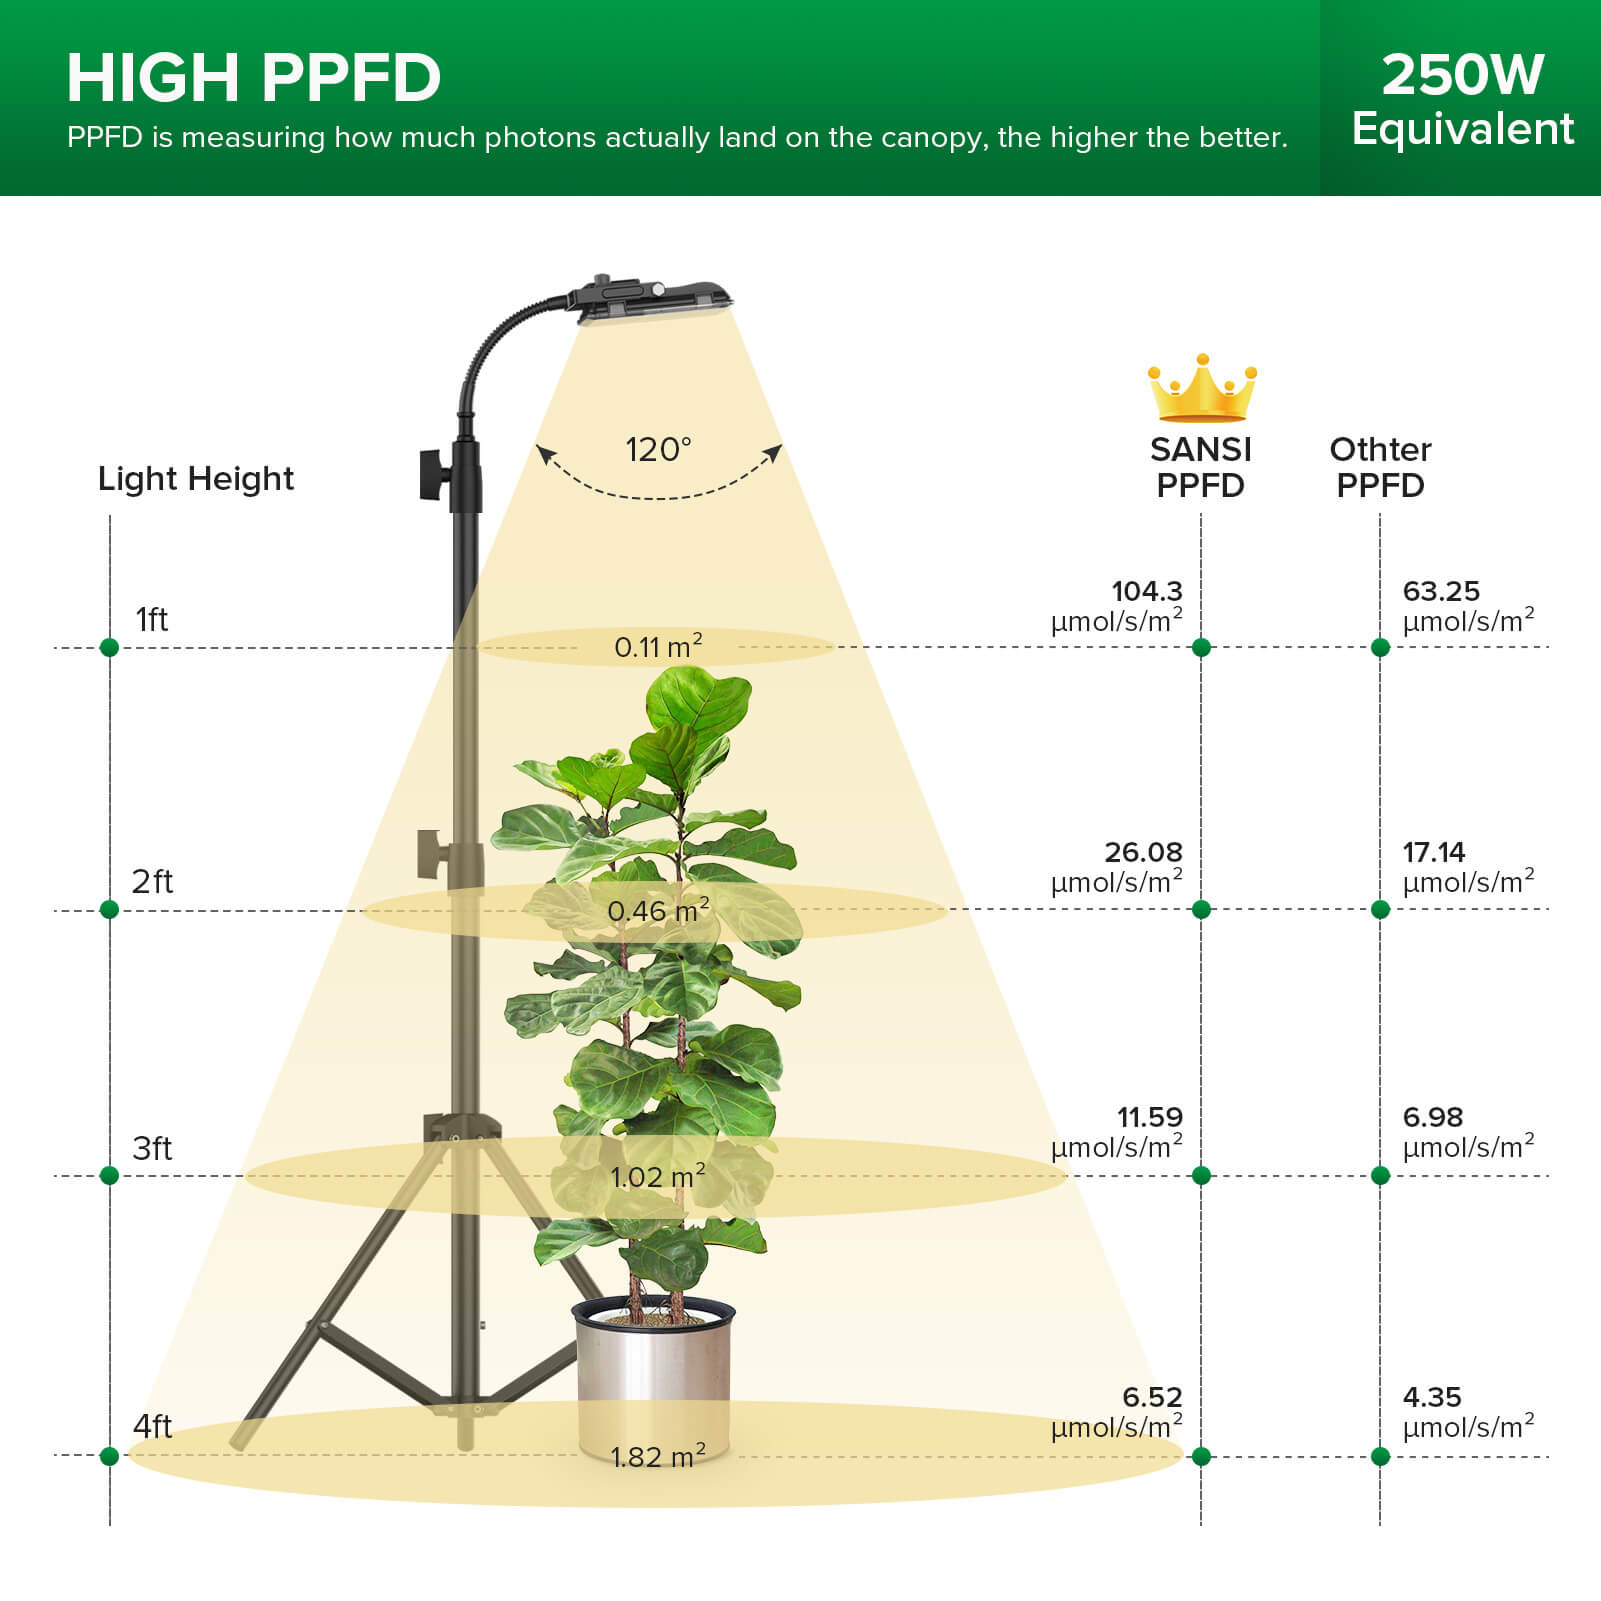 30W LED Grow Light With Tripod Stand has high PPFD.